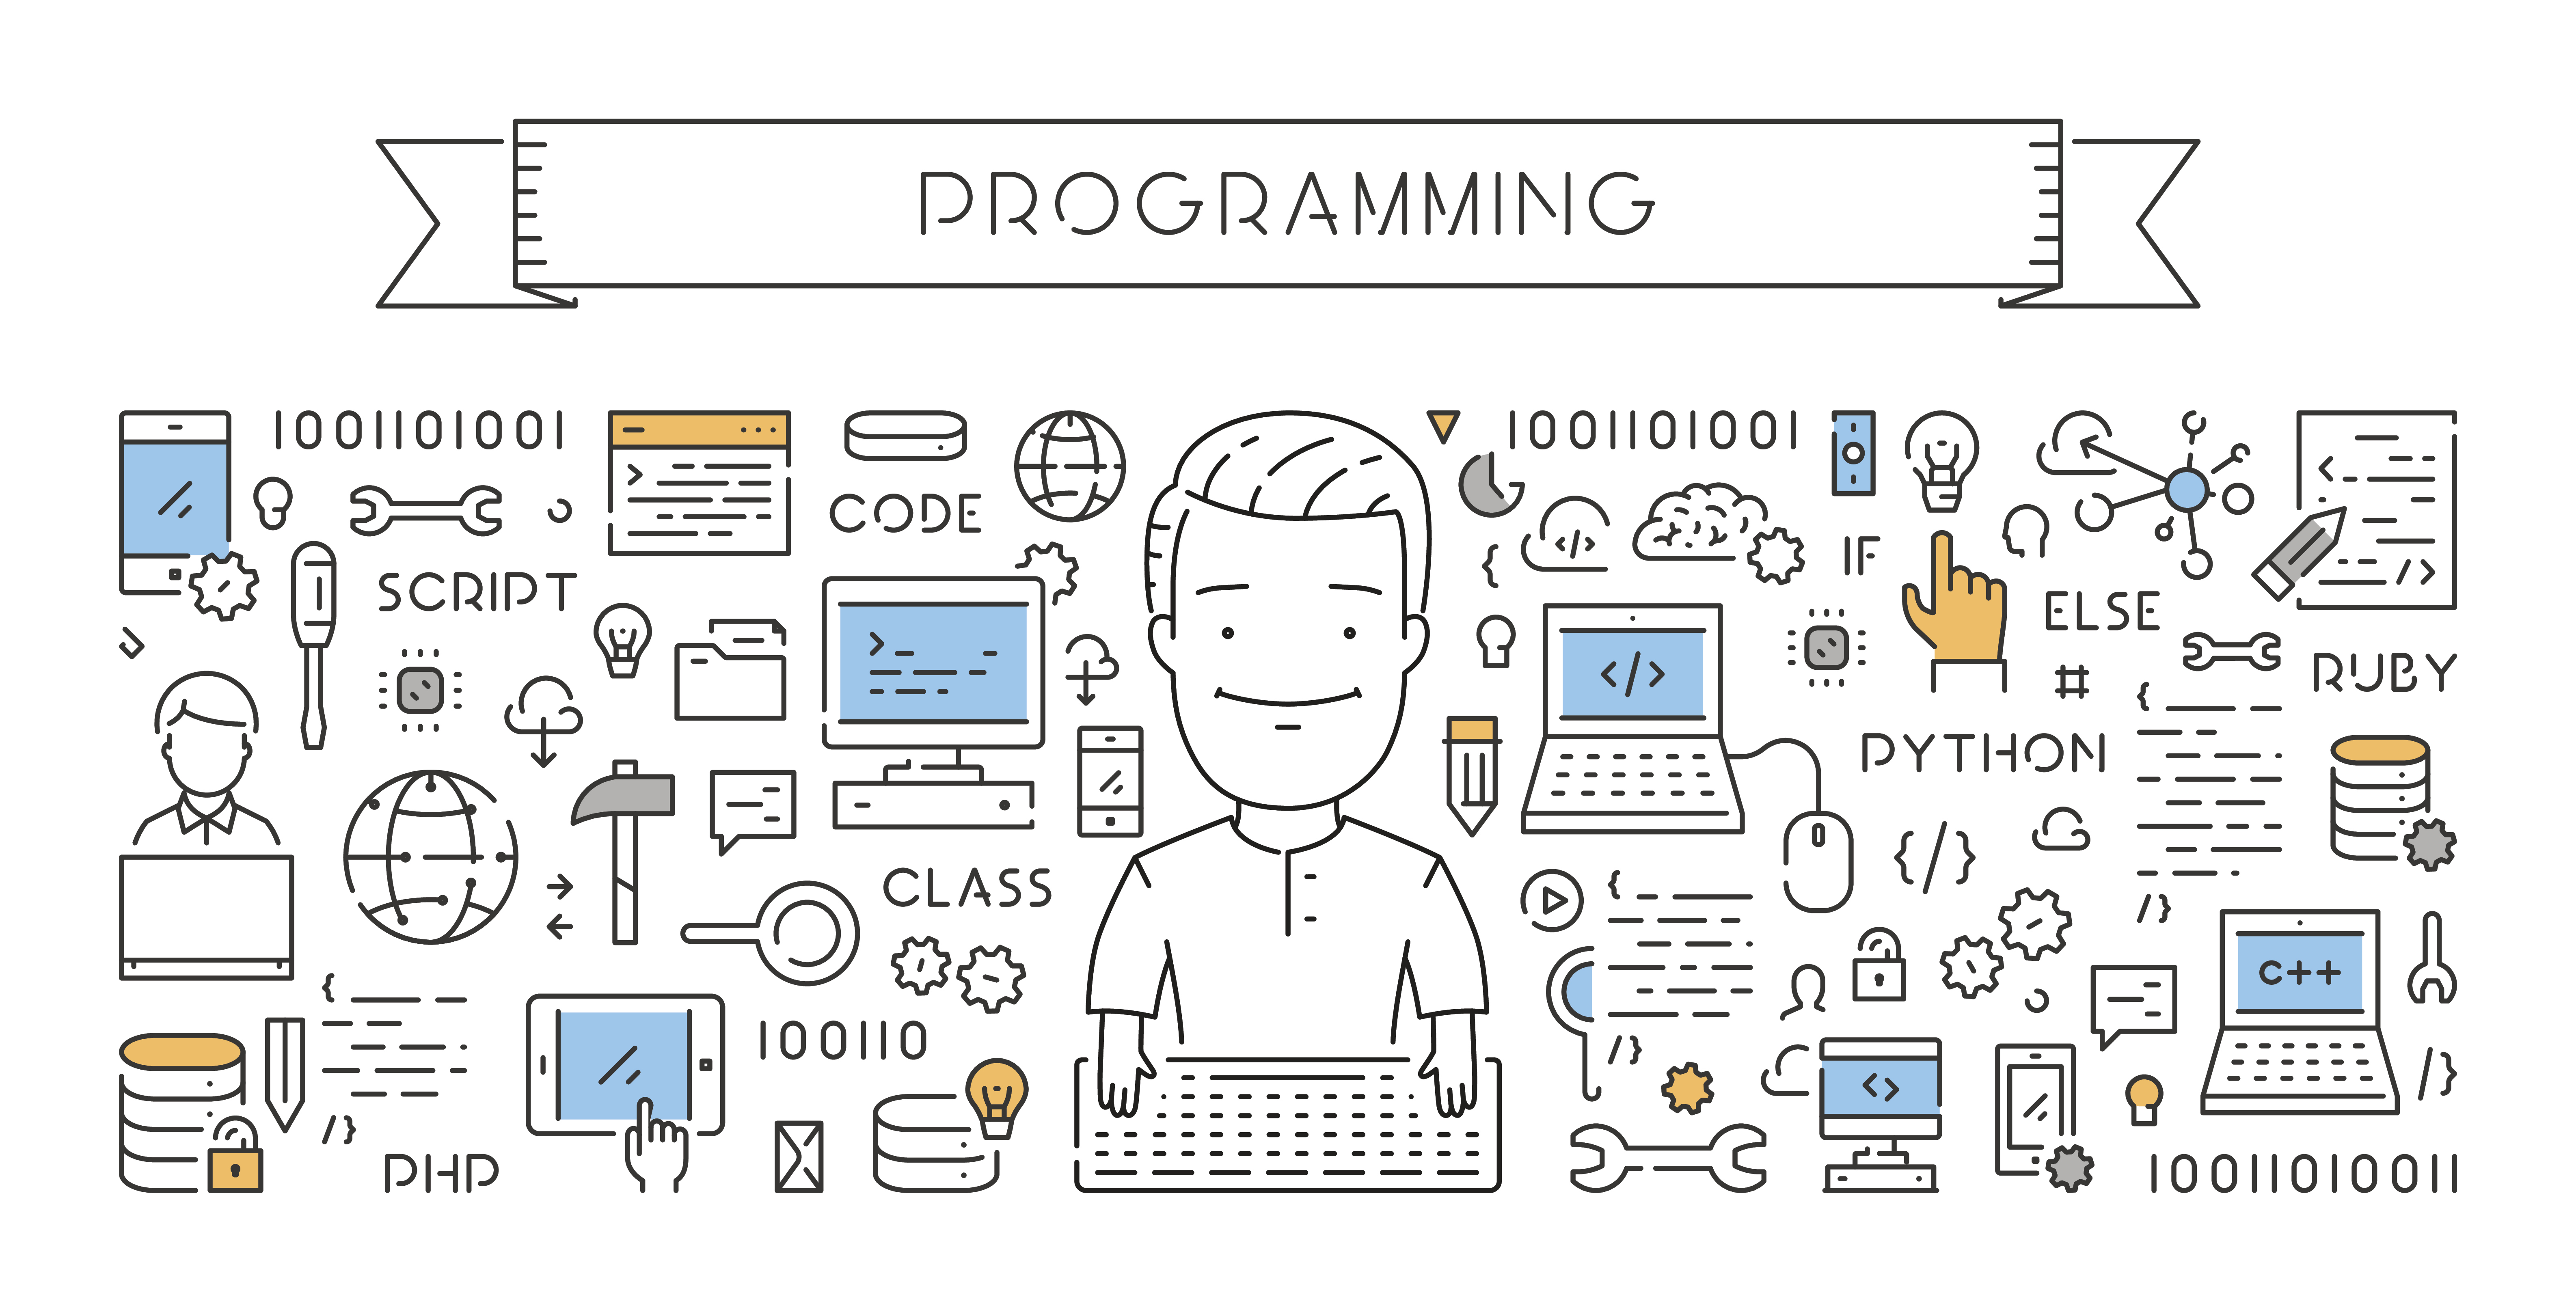 A cartoon drawing of a banner with "Programming" above a person surrounded by computer accessories